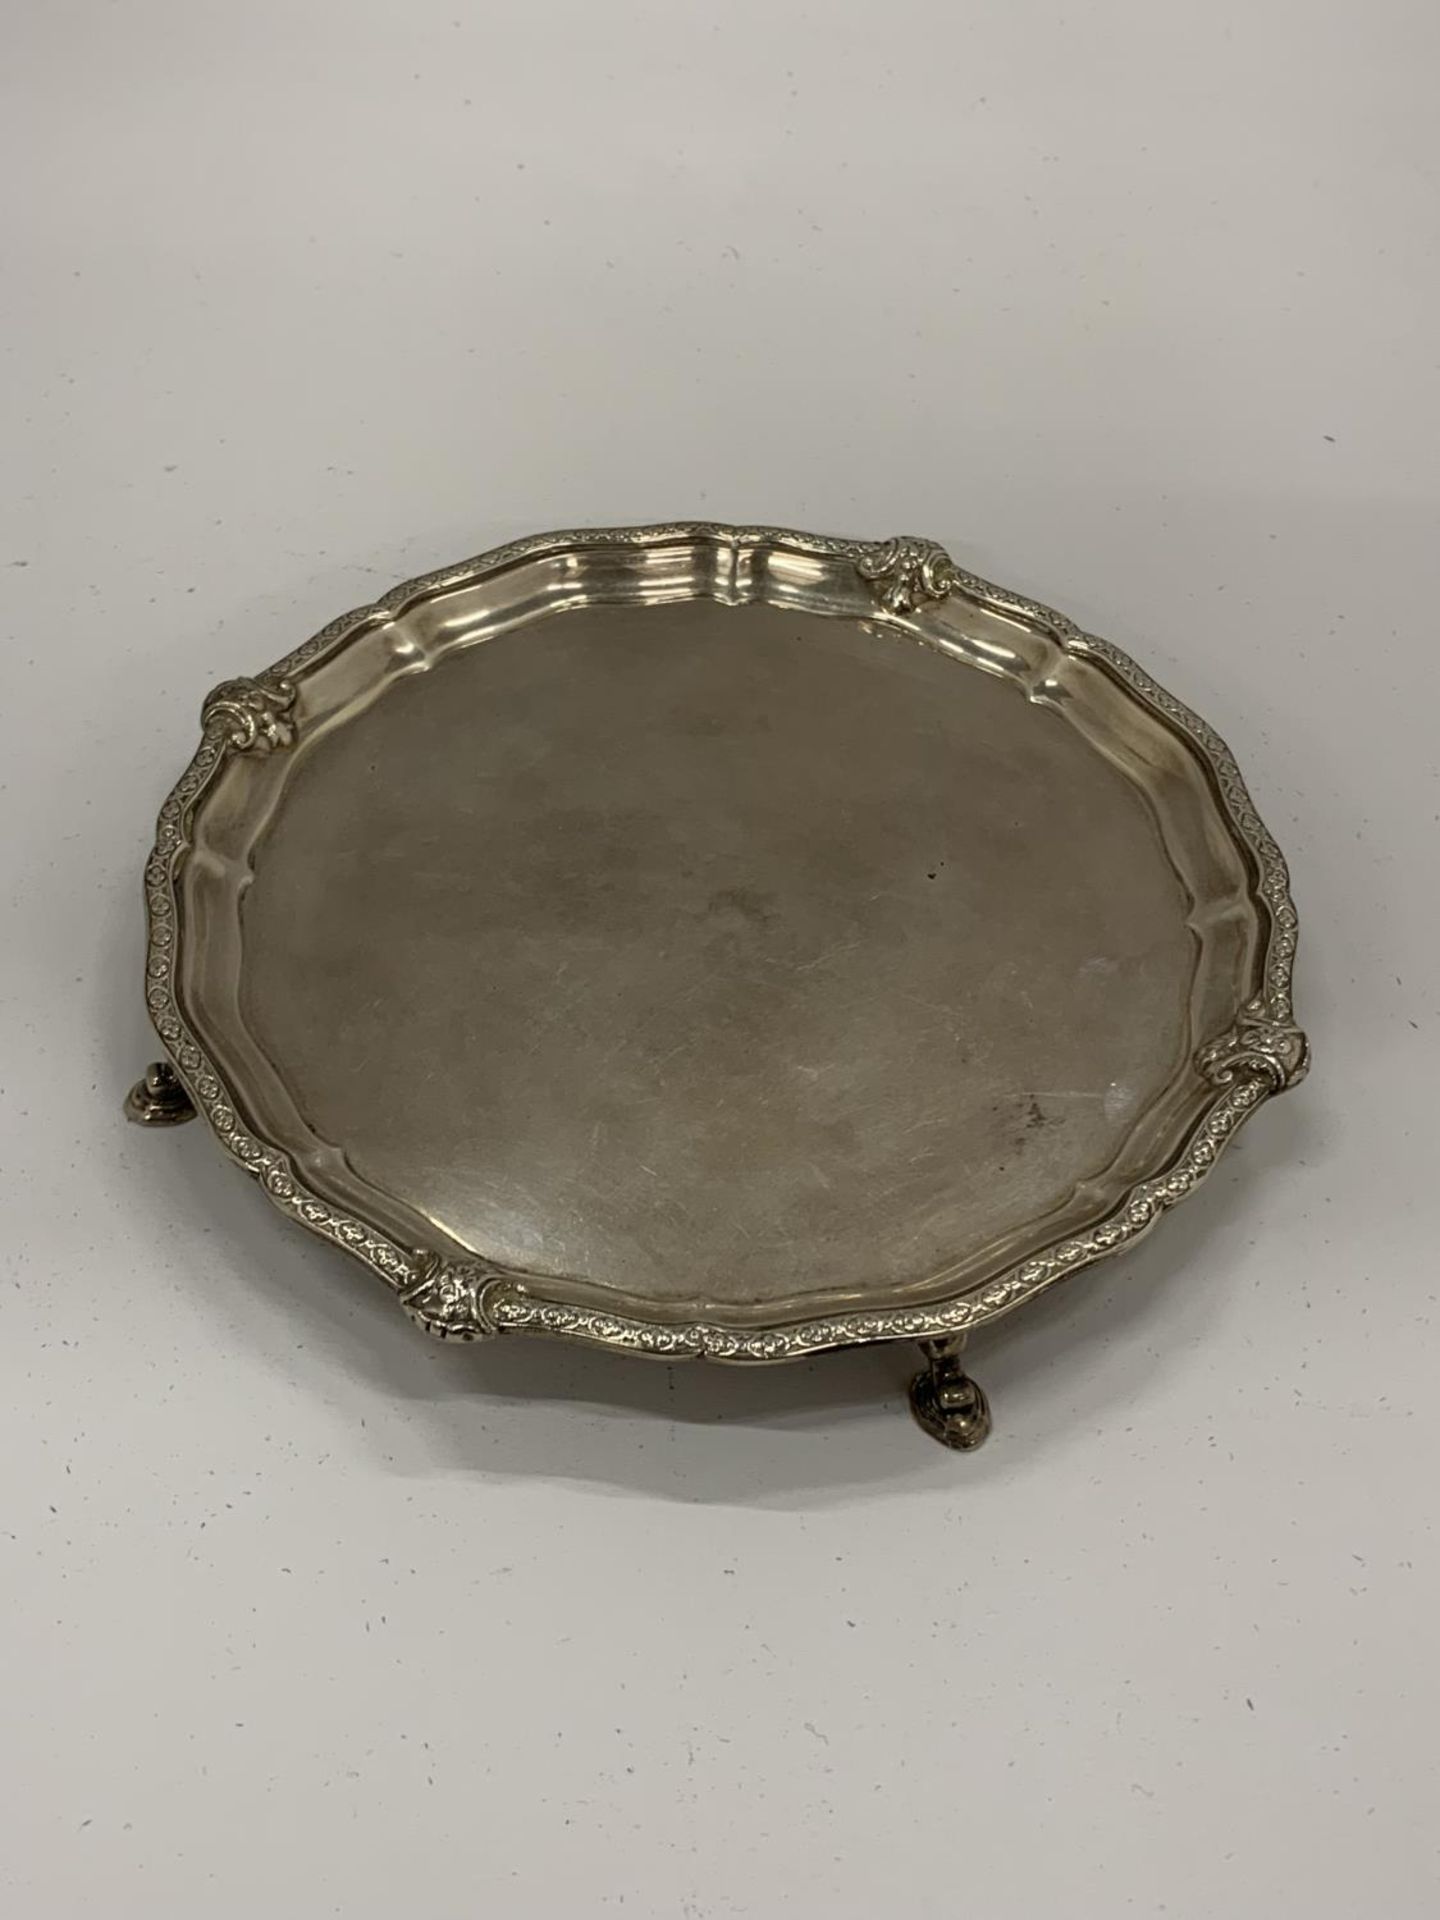 A GEORGE V SILVER SALVER / CARD TRAY, HALLMARKS FOR BIRMINGHAM, 1925, WEIGHT 175G, WIDTH 15CM - Image 2 of 6